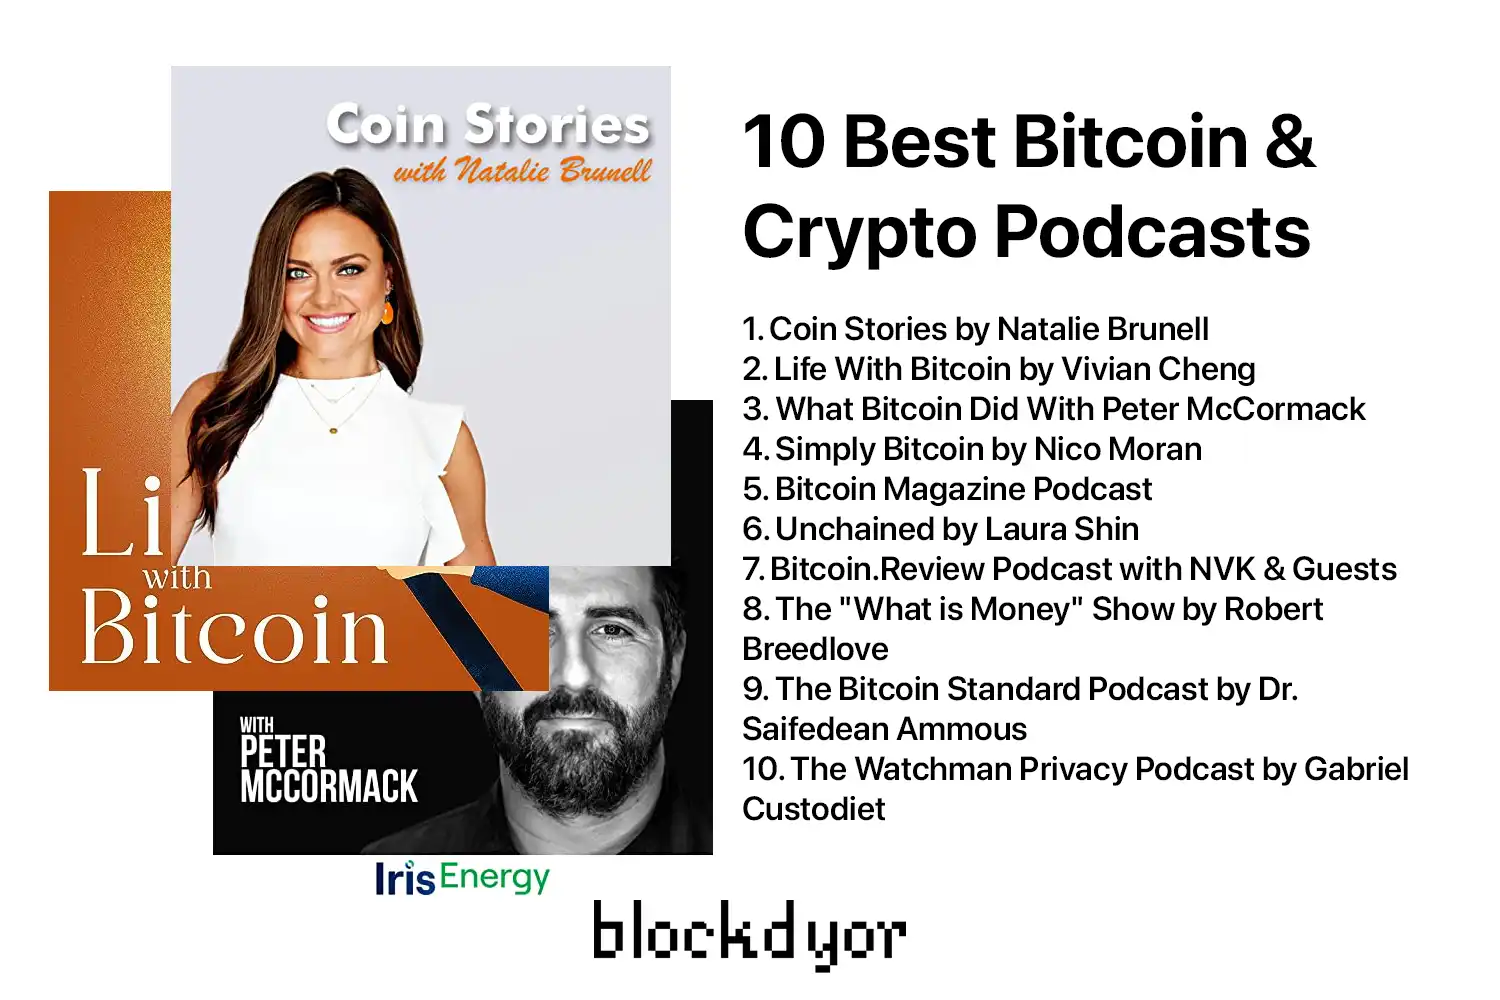 10 Best Bitcoin & Crypto Podcasts Overview